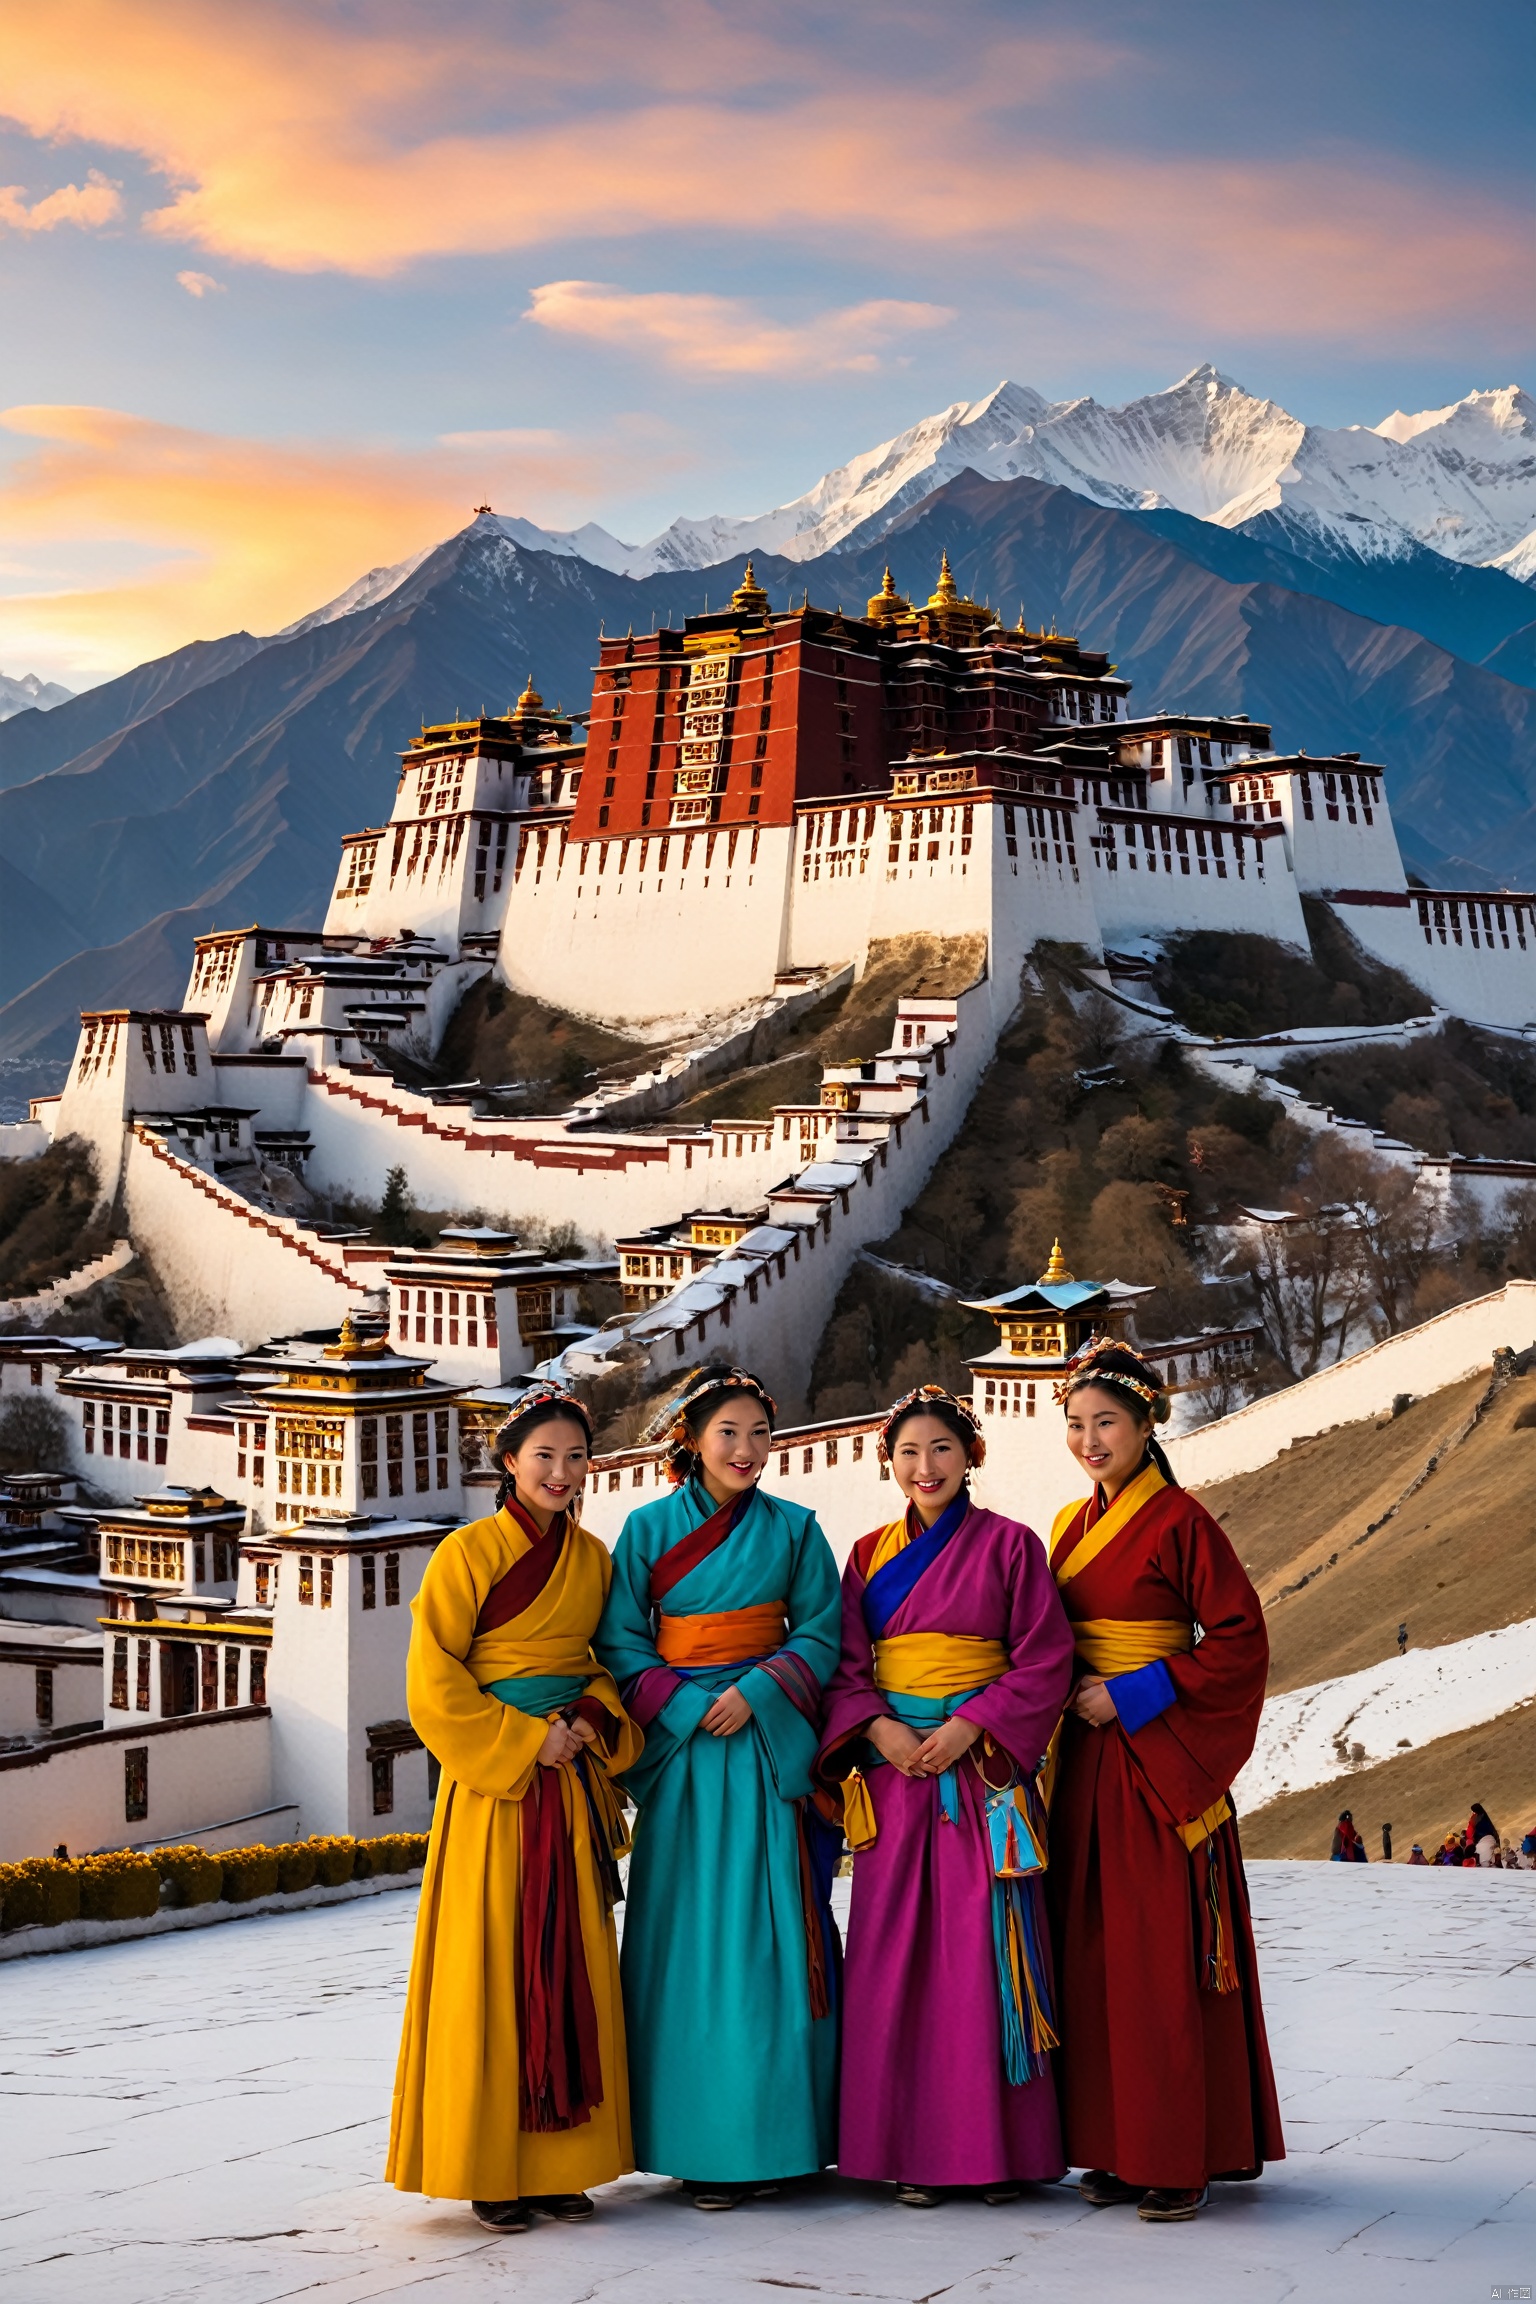 A serene scene unfolds: a group of Tibetan women, resplendent in their vibrant traditional attire, gather at the iconic Potala Palace. The majestic palace's golden walls glow warmly in the soft light of dawn, while the women's intricate garments shimmer with subtle colors. They pose with gentle ease, surrounded by the snow-capped Himalayas' majestic peaks, their faces radiant with kindness and warmth.